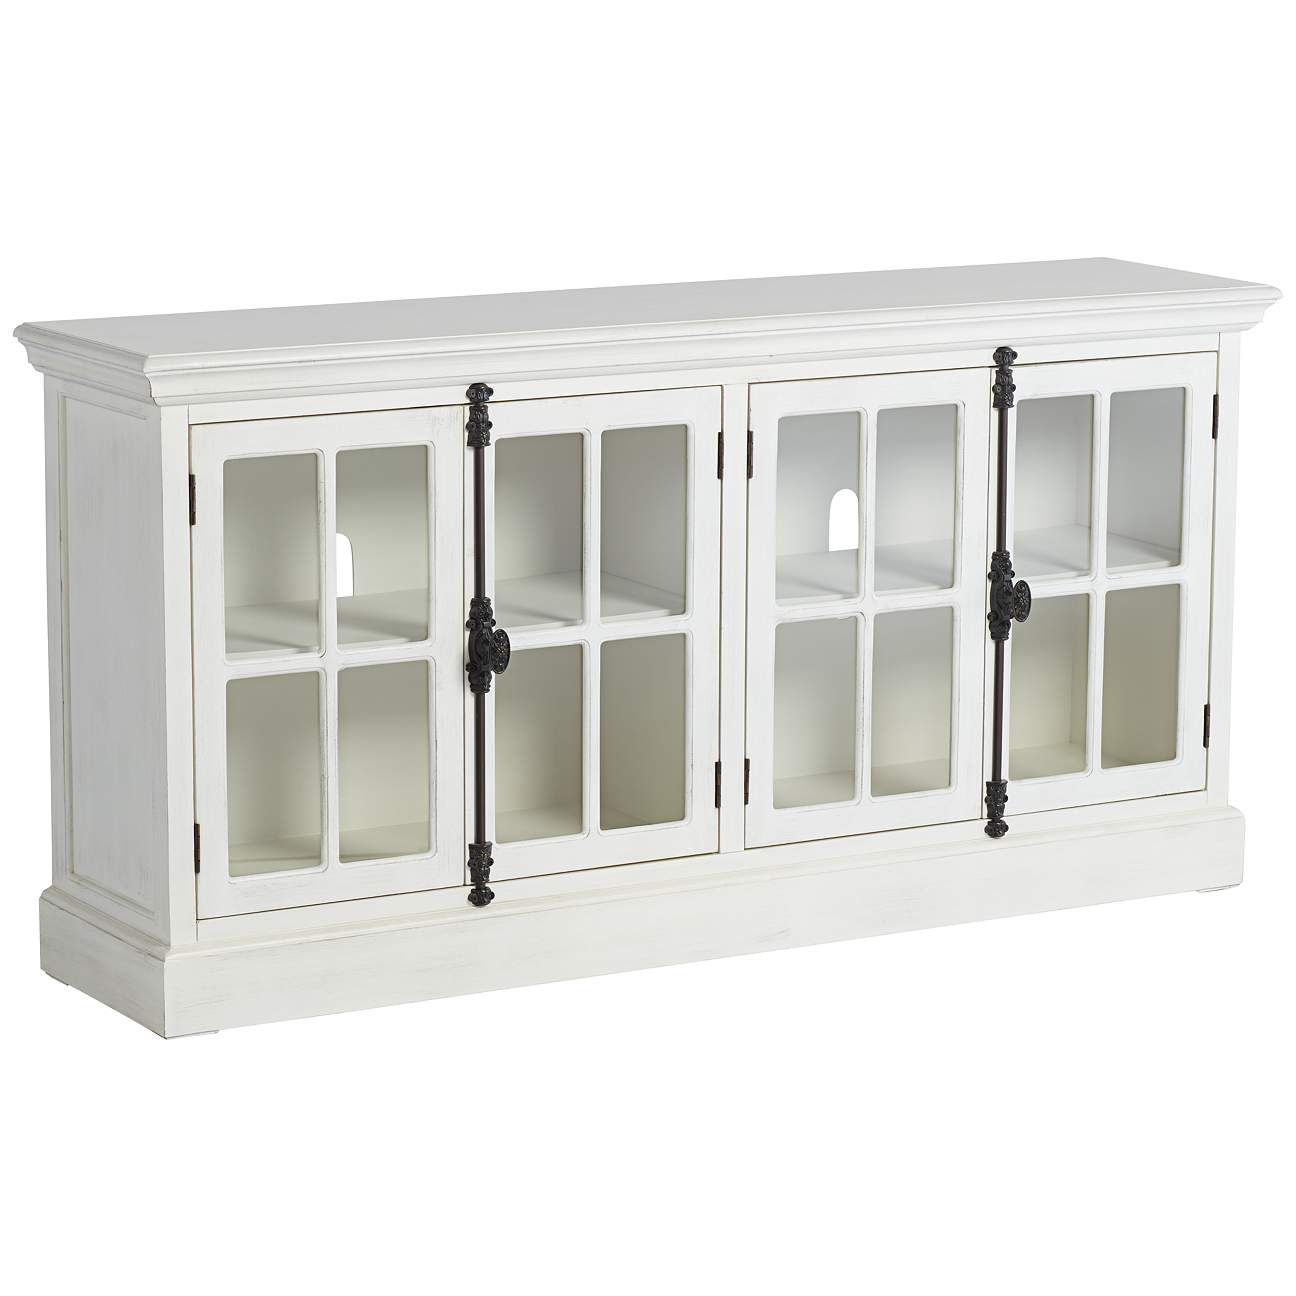 Coventry 72" Wide TV Media Console in White with Glass Doors - #81J77 | Lamps Plus | LampsPlus.com